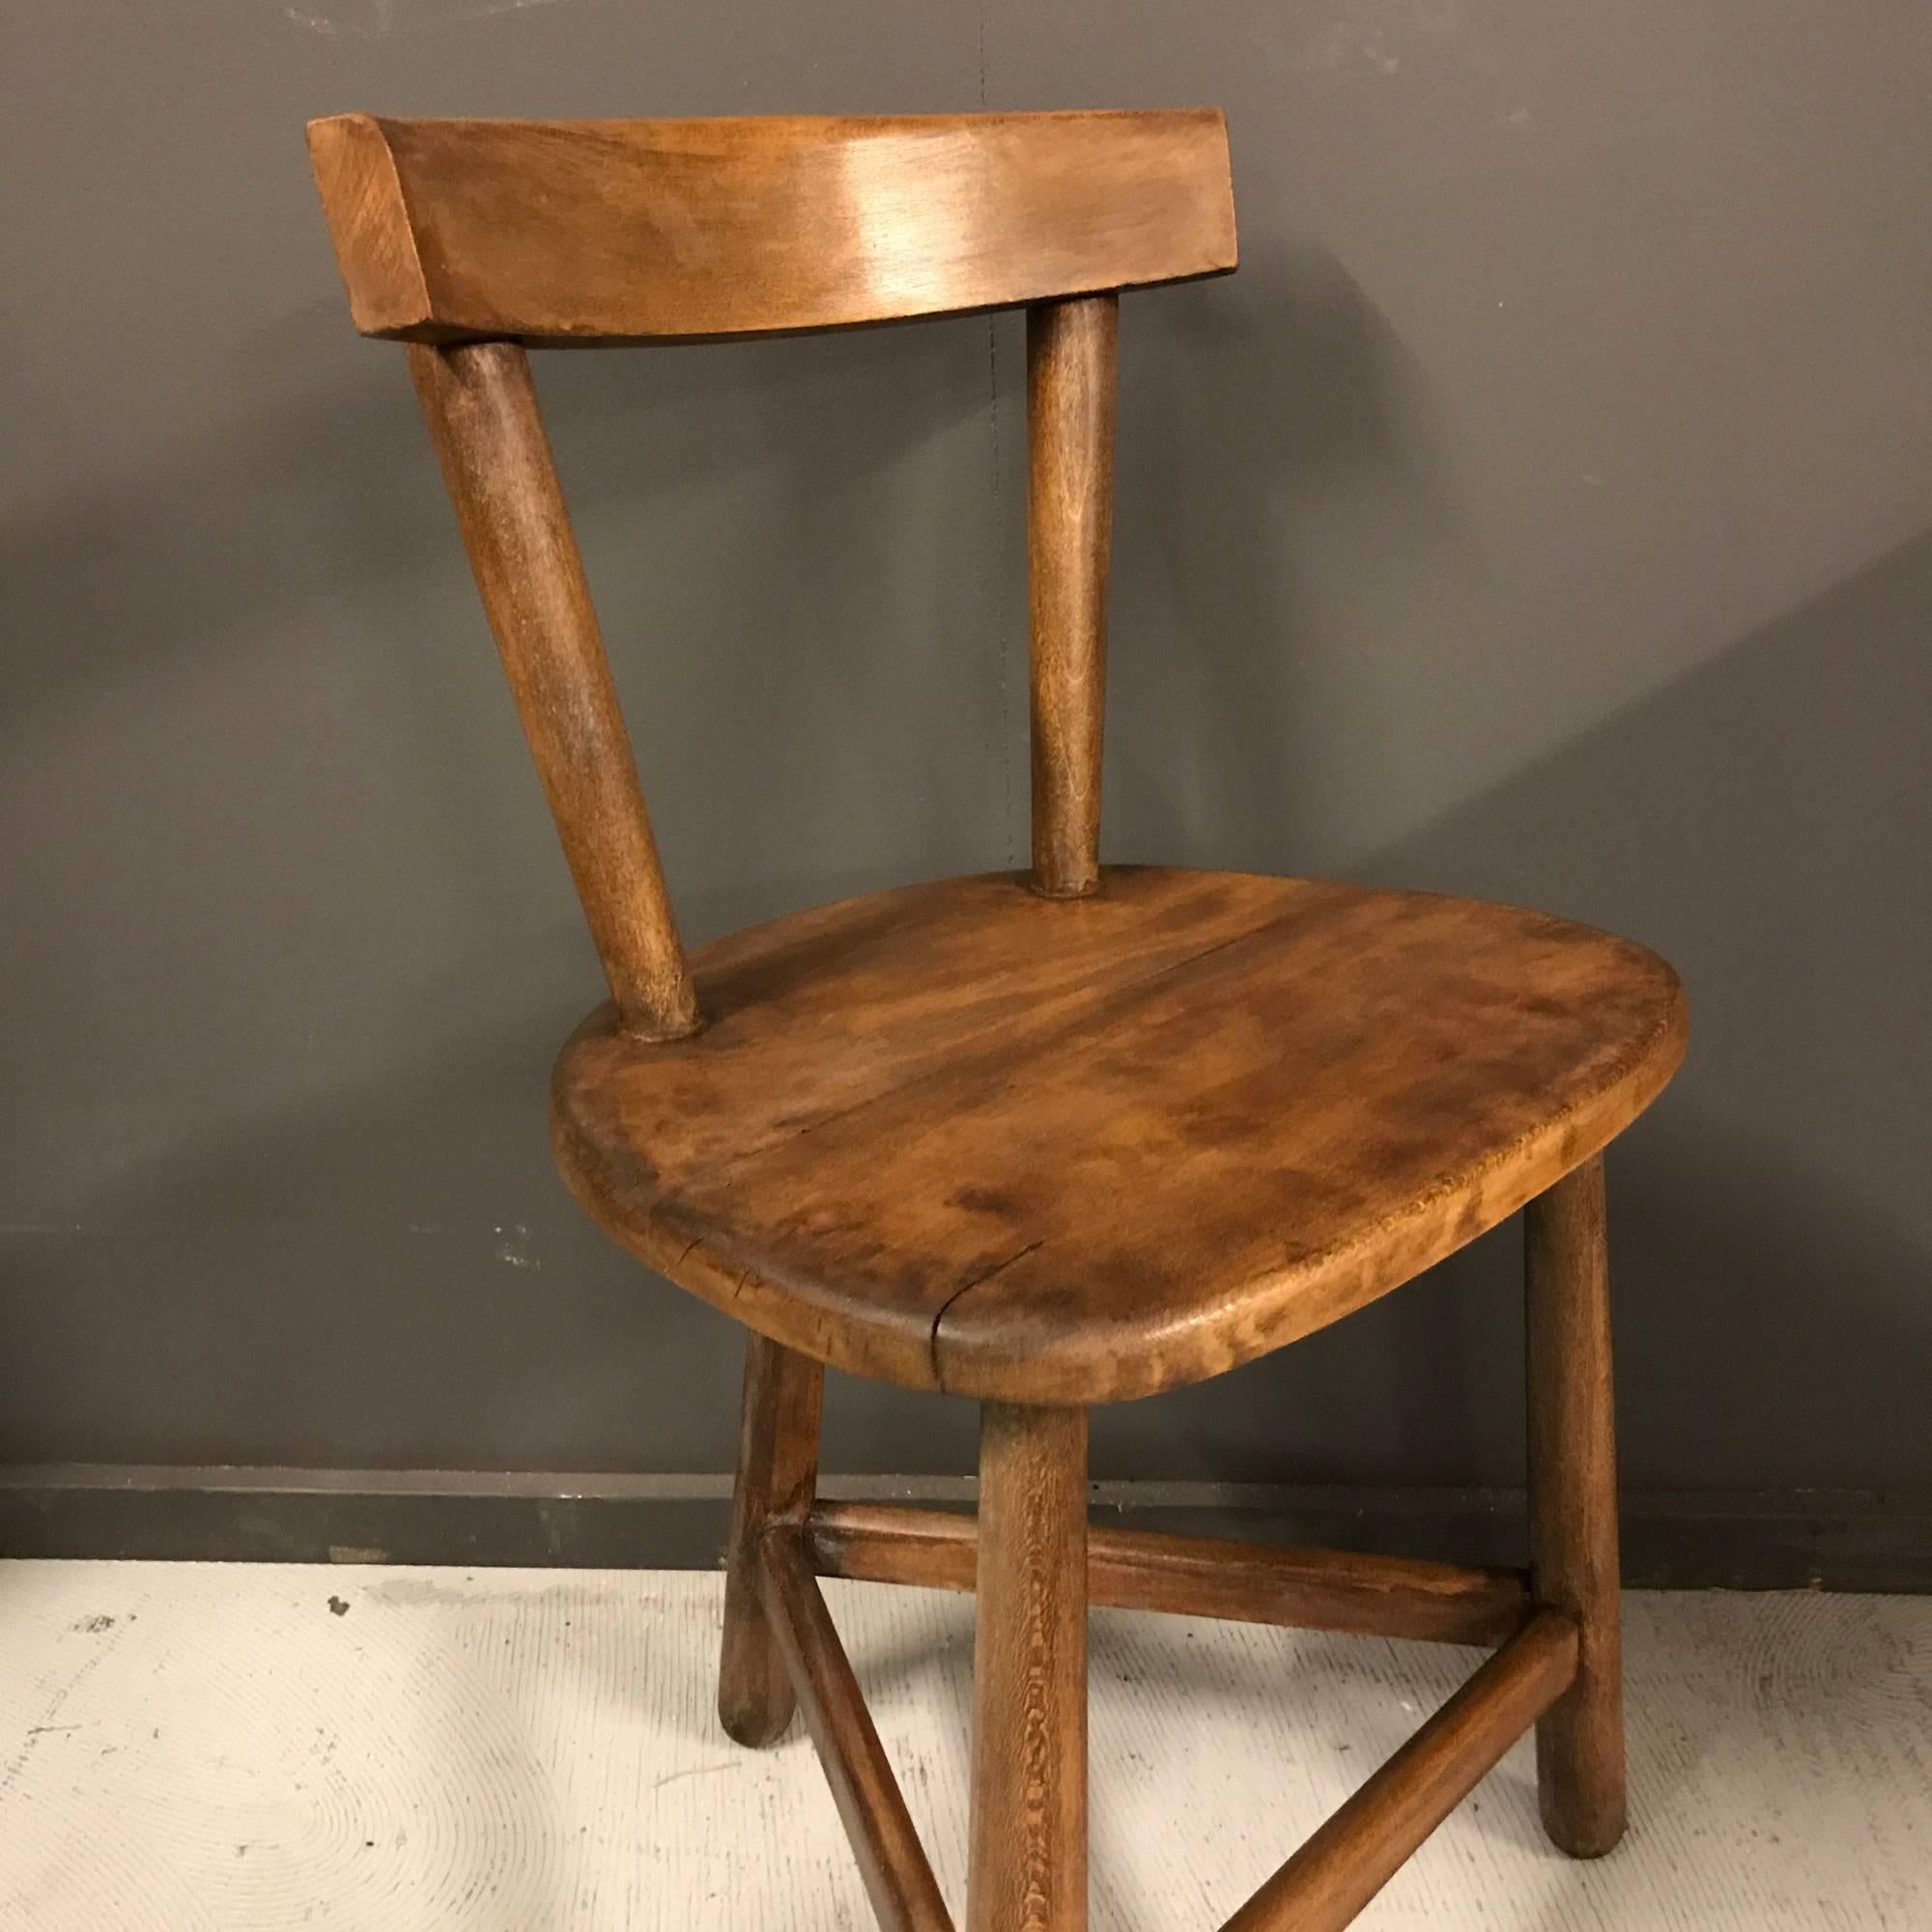 Native beech wooden chair with three legs. 
Probably made in England during the early 20th century.